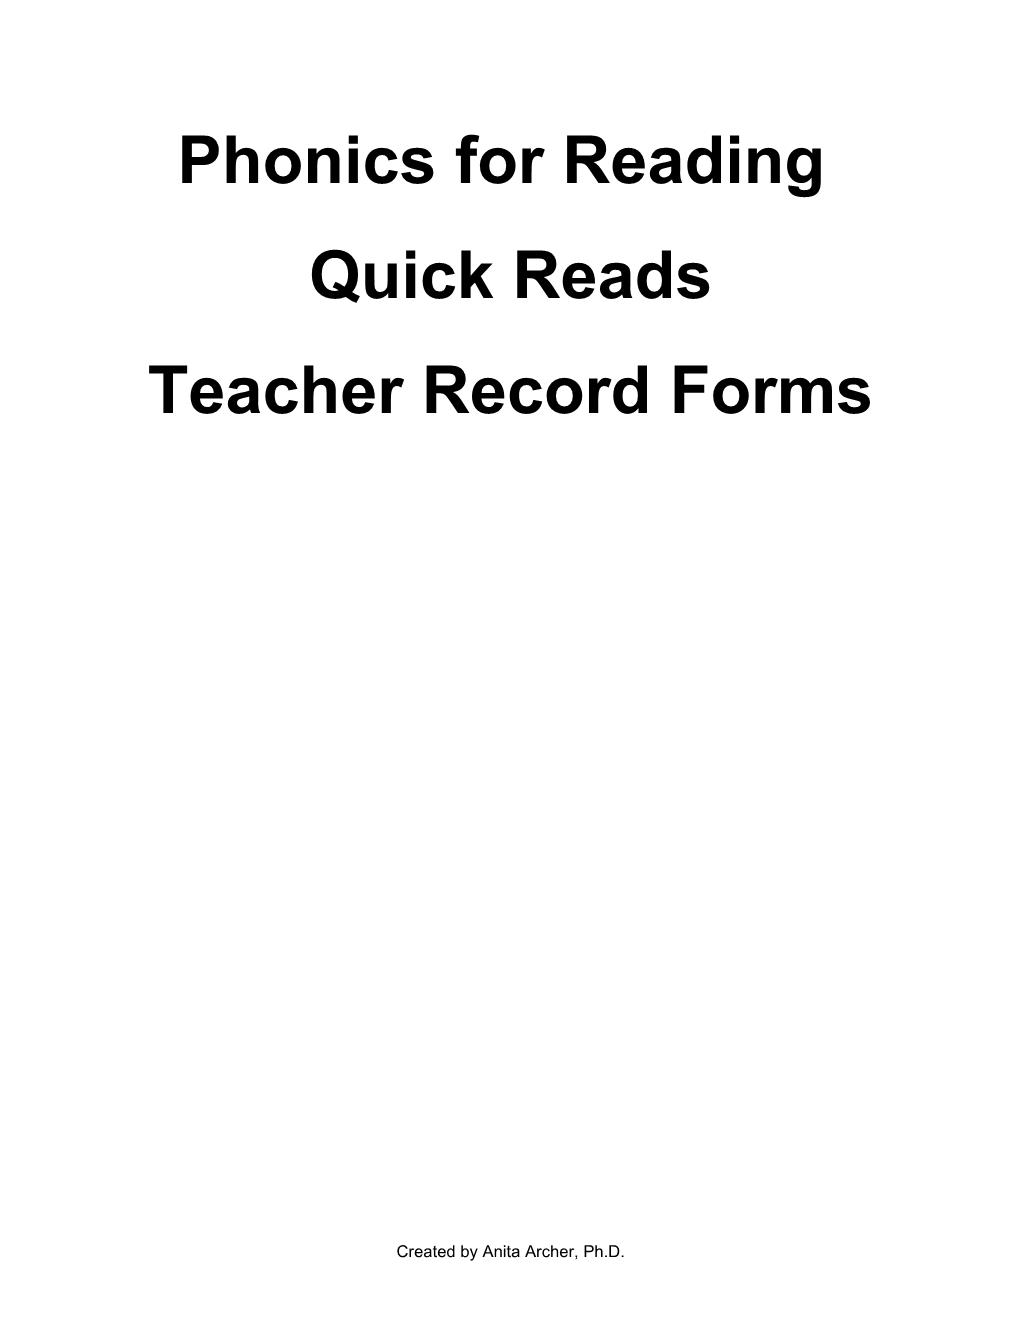 After Lesson 4, Phonics for Reading, Level 1